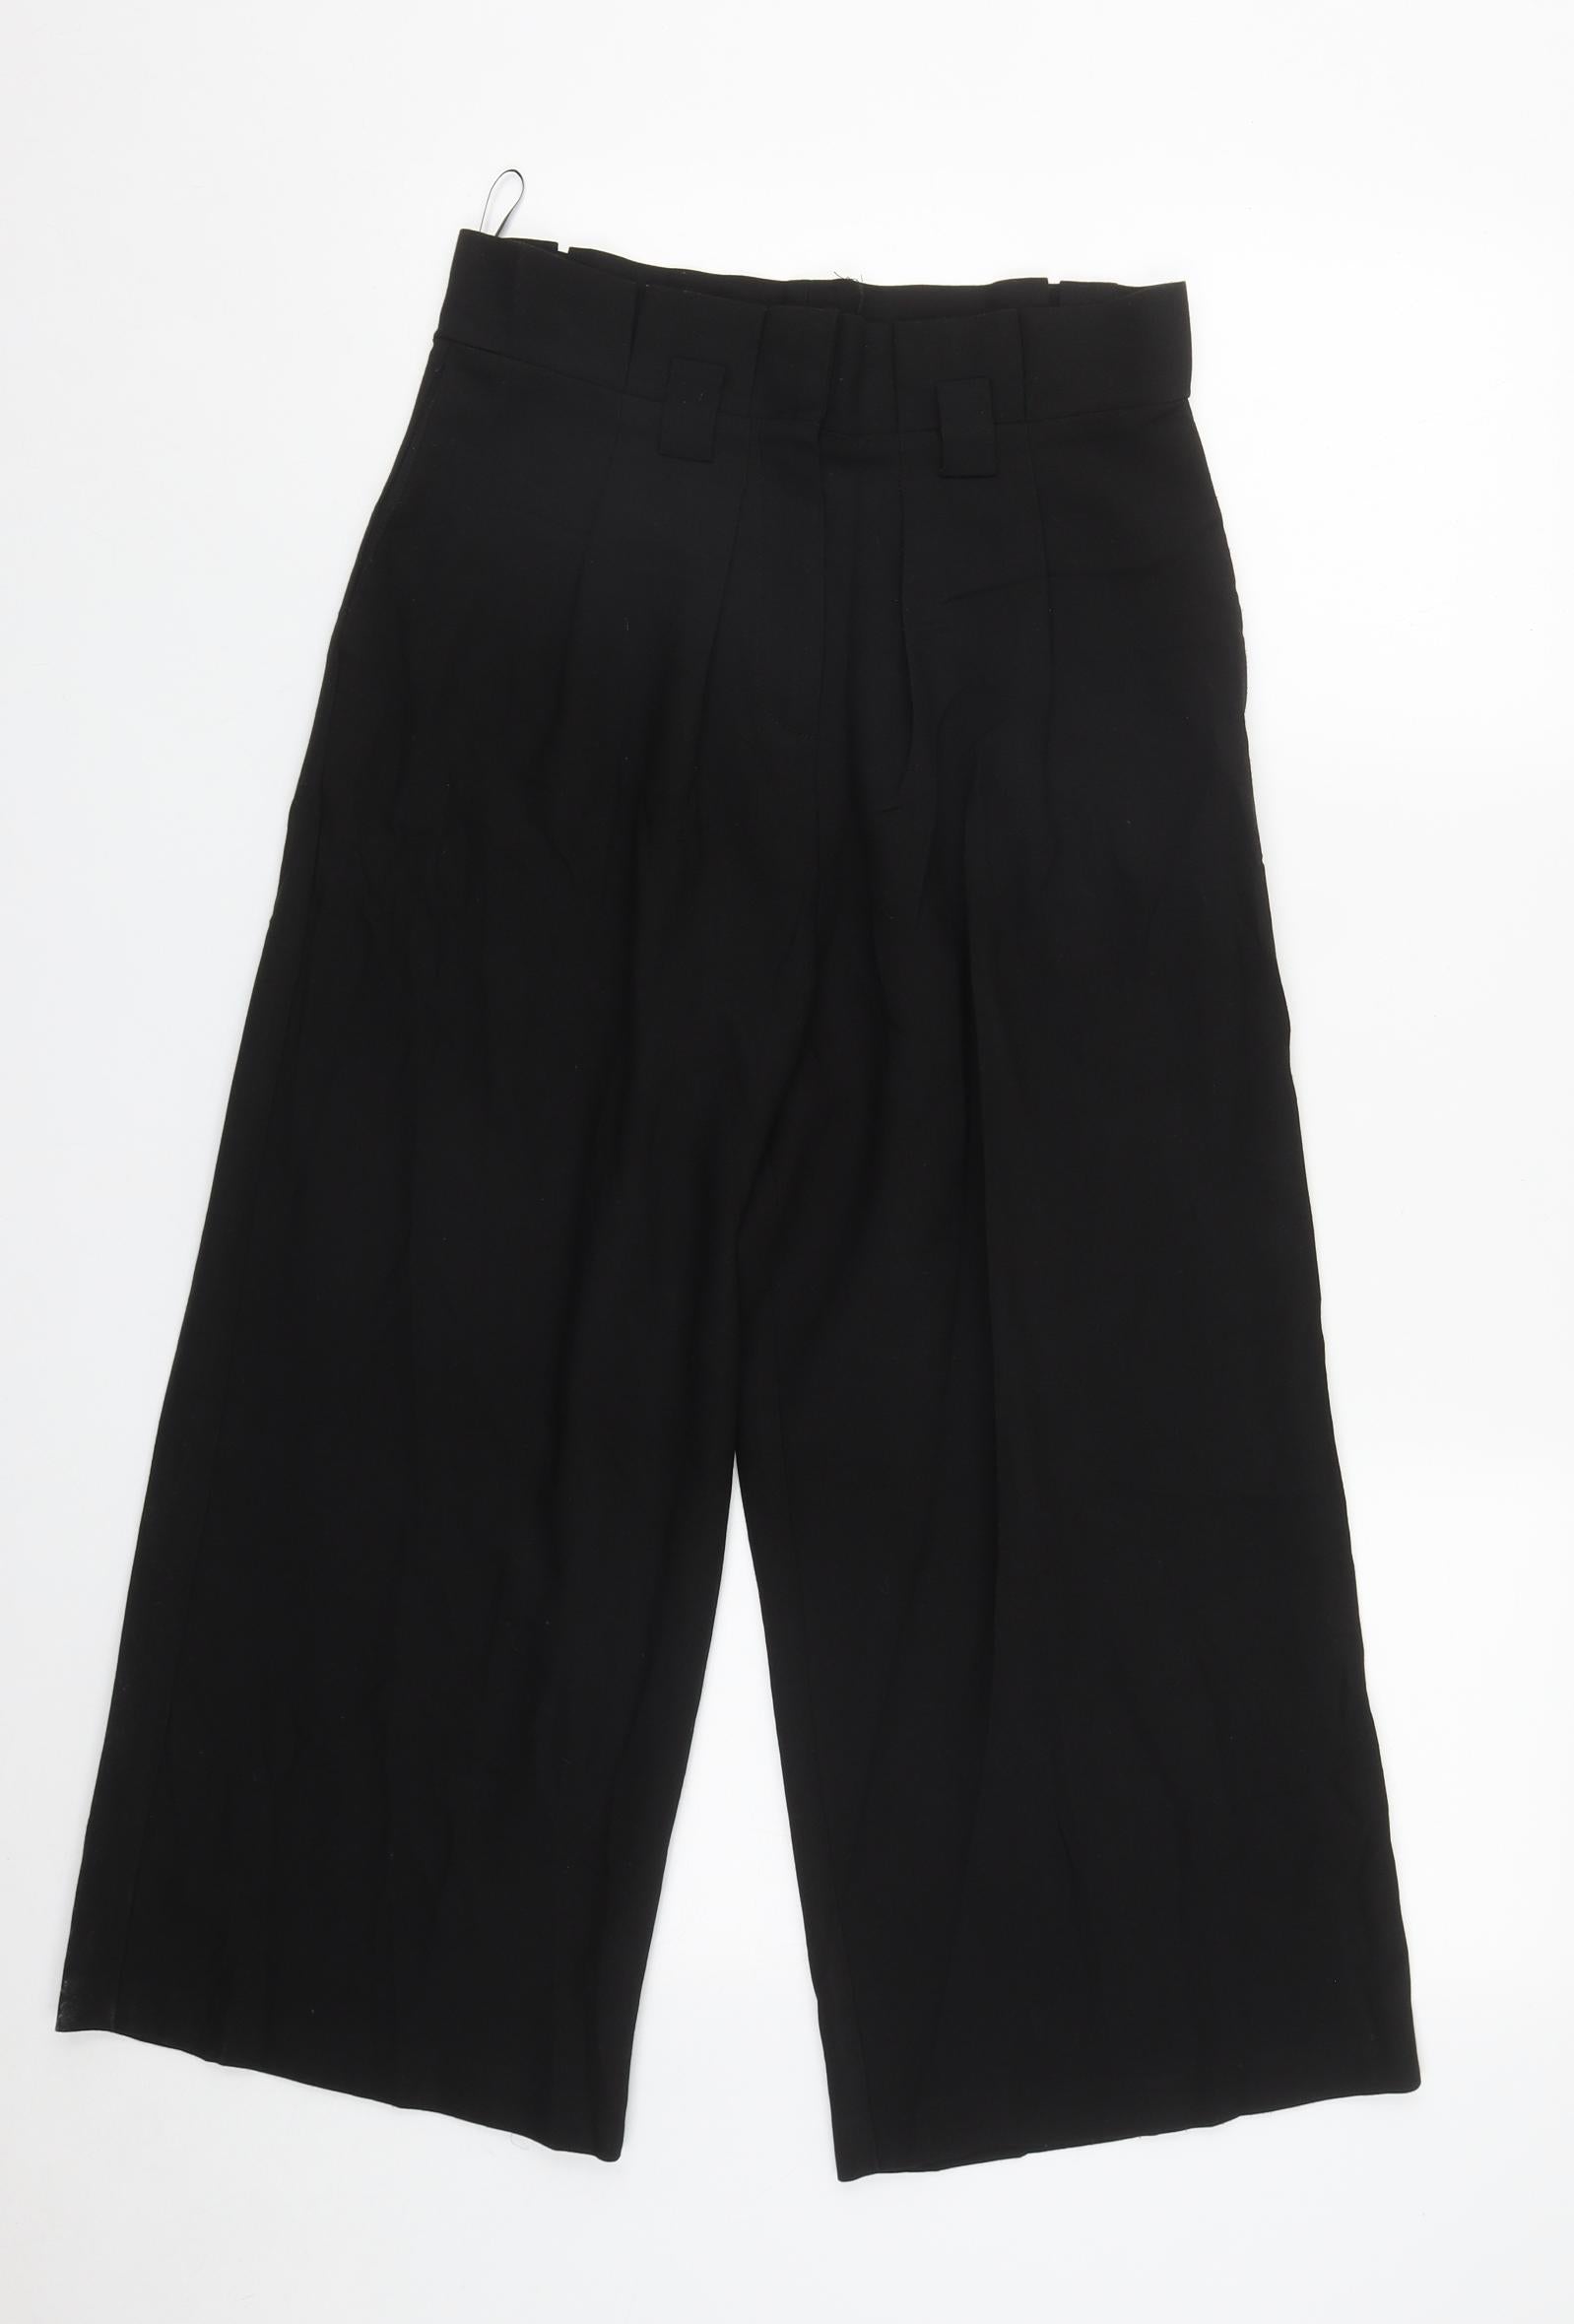 Lipsy Womens Black Polyester Cropped Trousers Size 10 L22 in